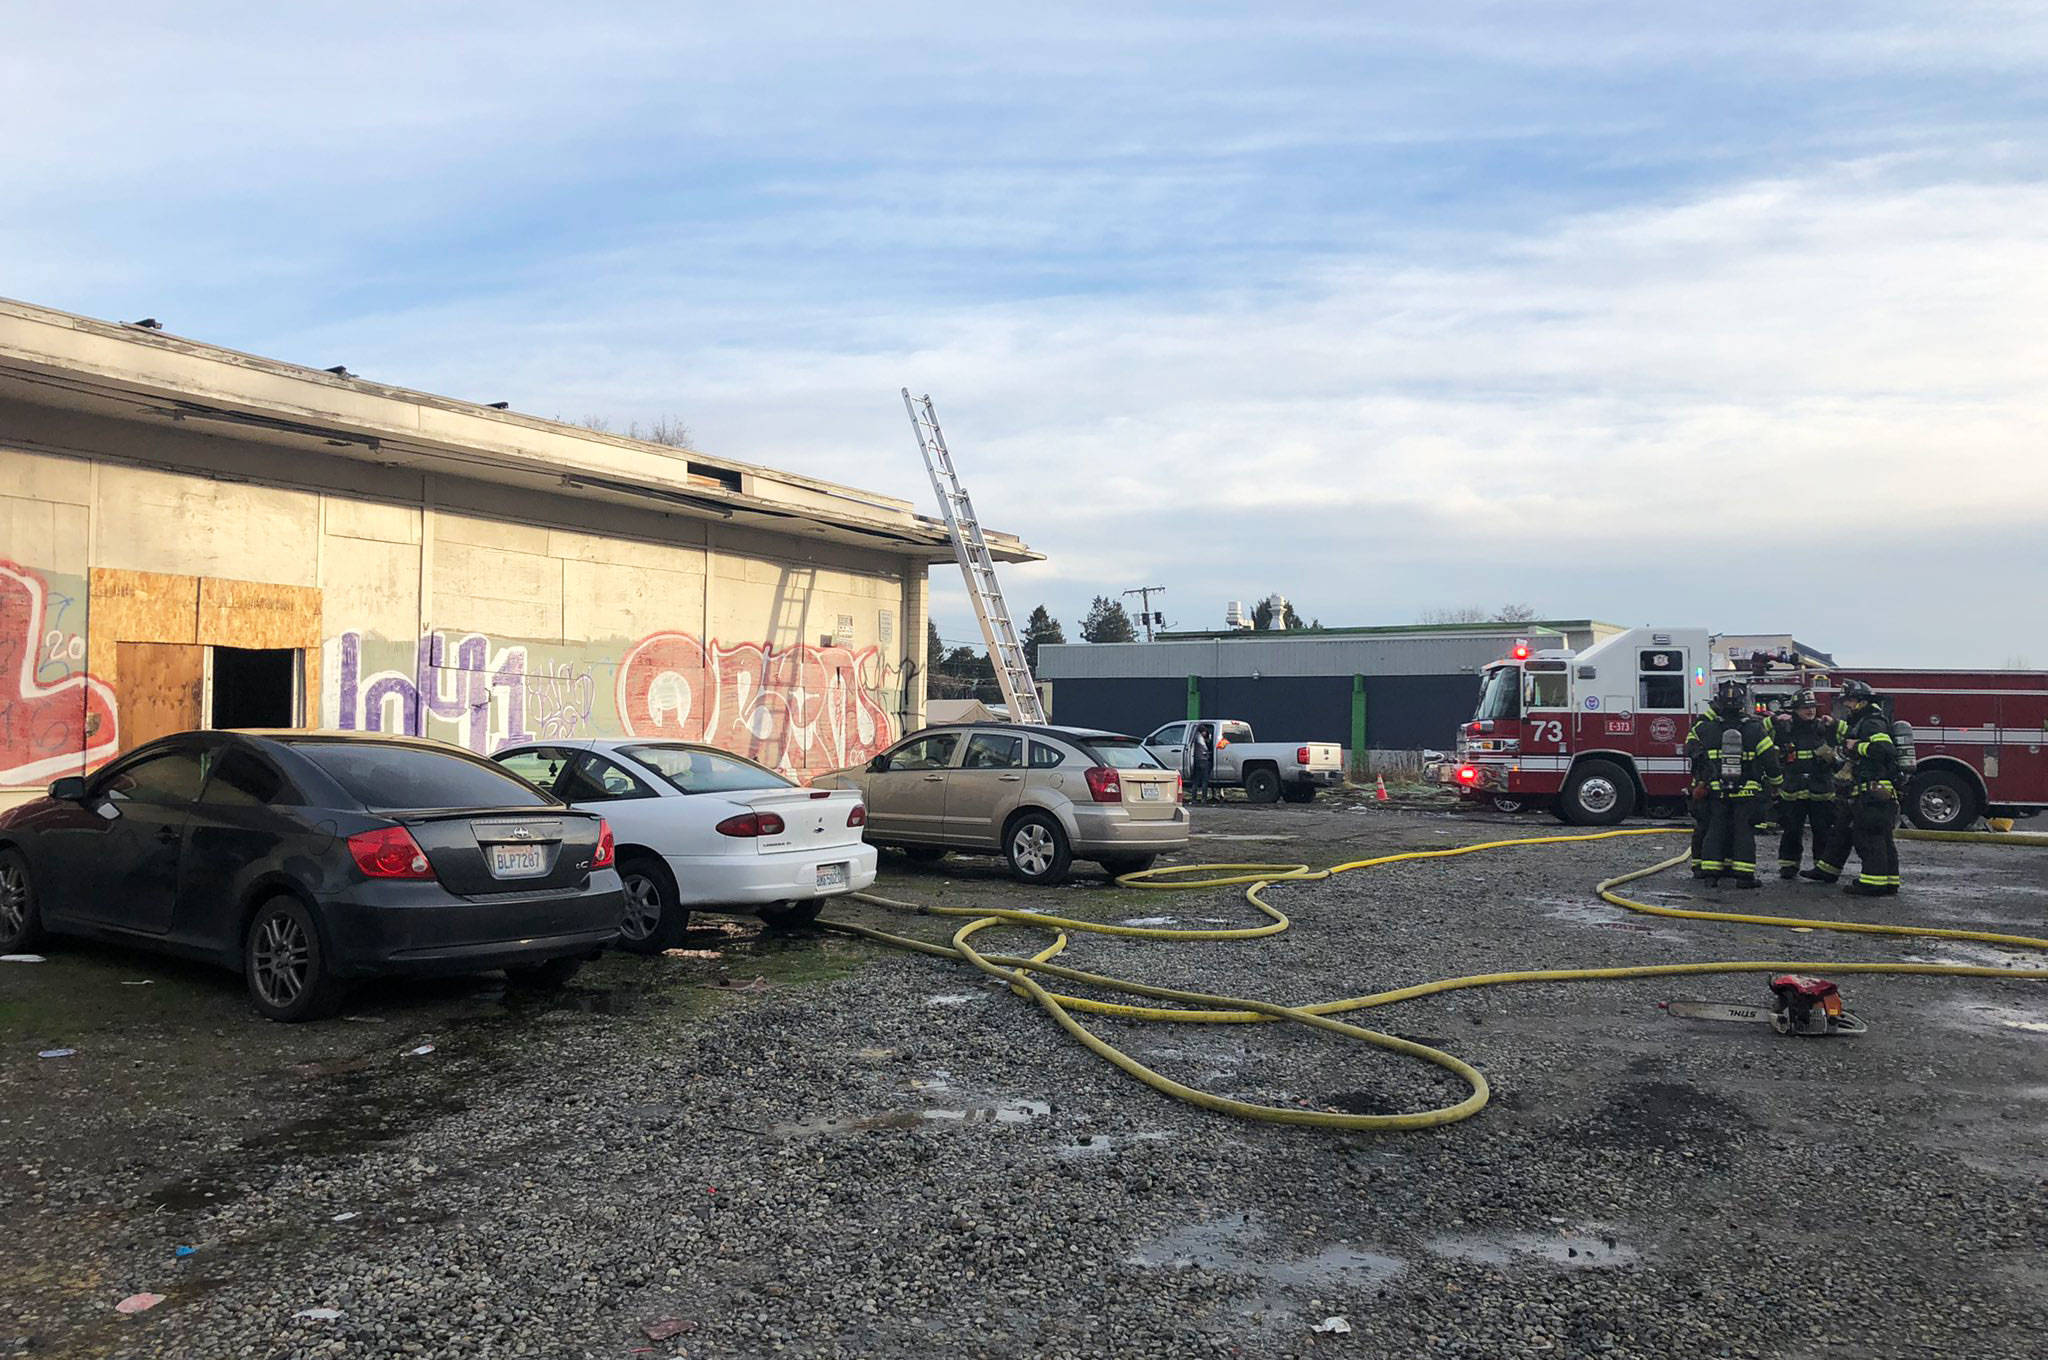 Puget Sound Fire put out a fire Tuesday morning, Dec. 29, inside a vacant building along West Meeker Street started by transients. COURTESY PHOTO, Puget Sound Fire